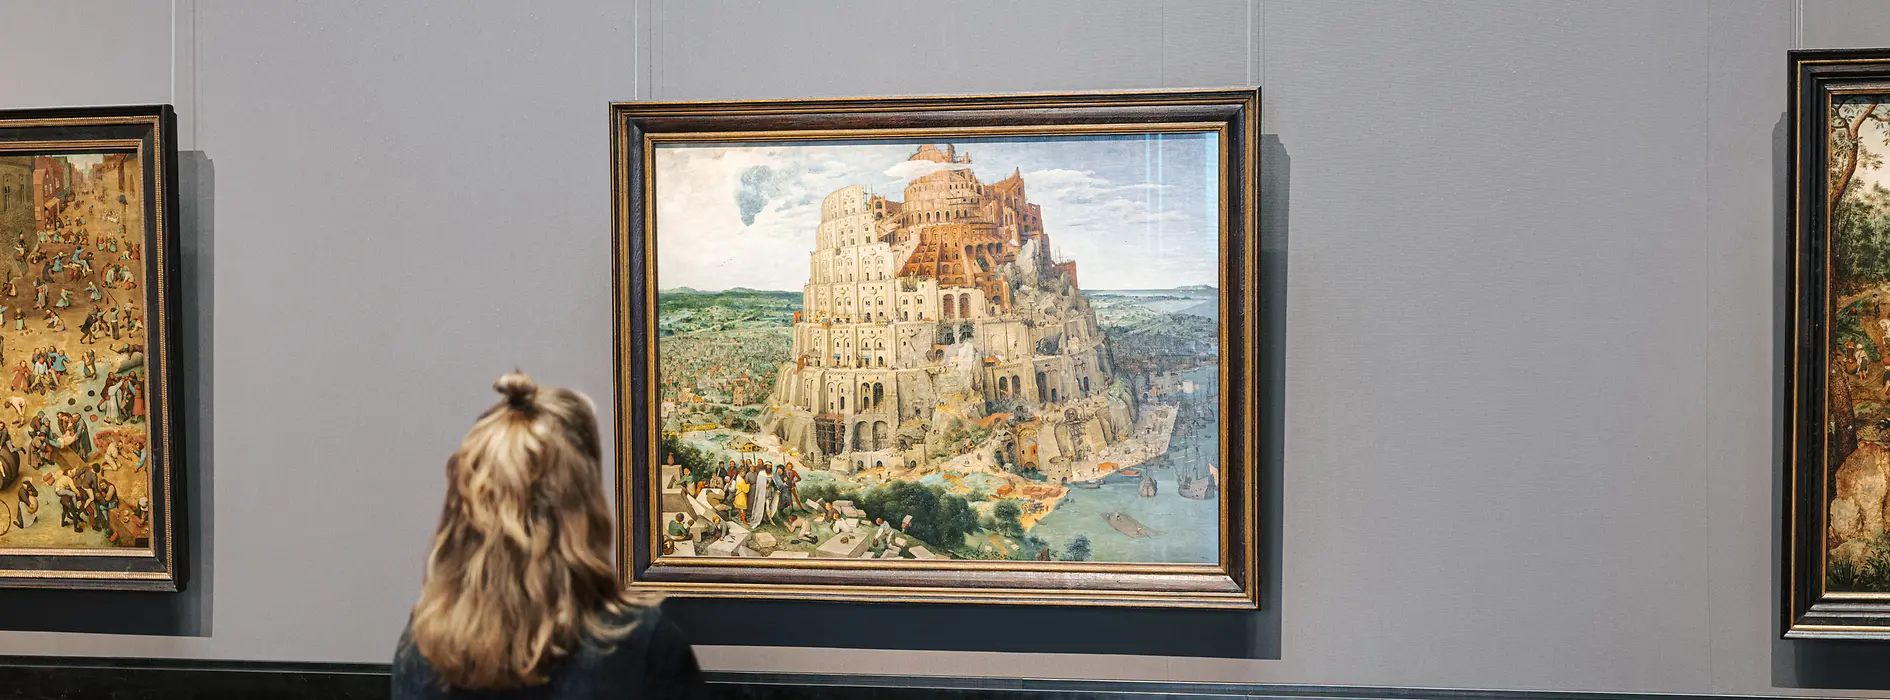 Visitor standing in front of the painting "Tower of Babel" by Pieter Bruegel at the Museum of Fine Arts in Vienna